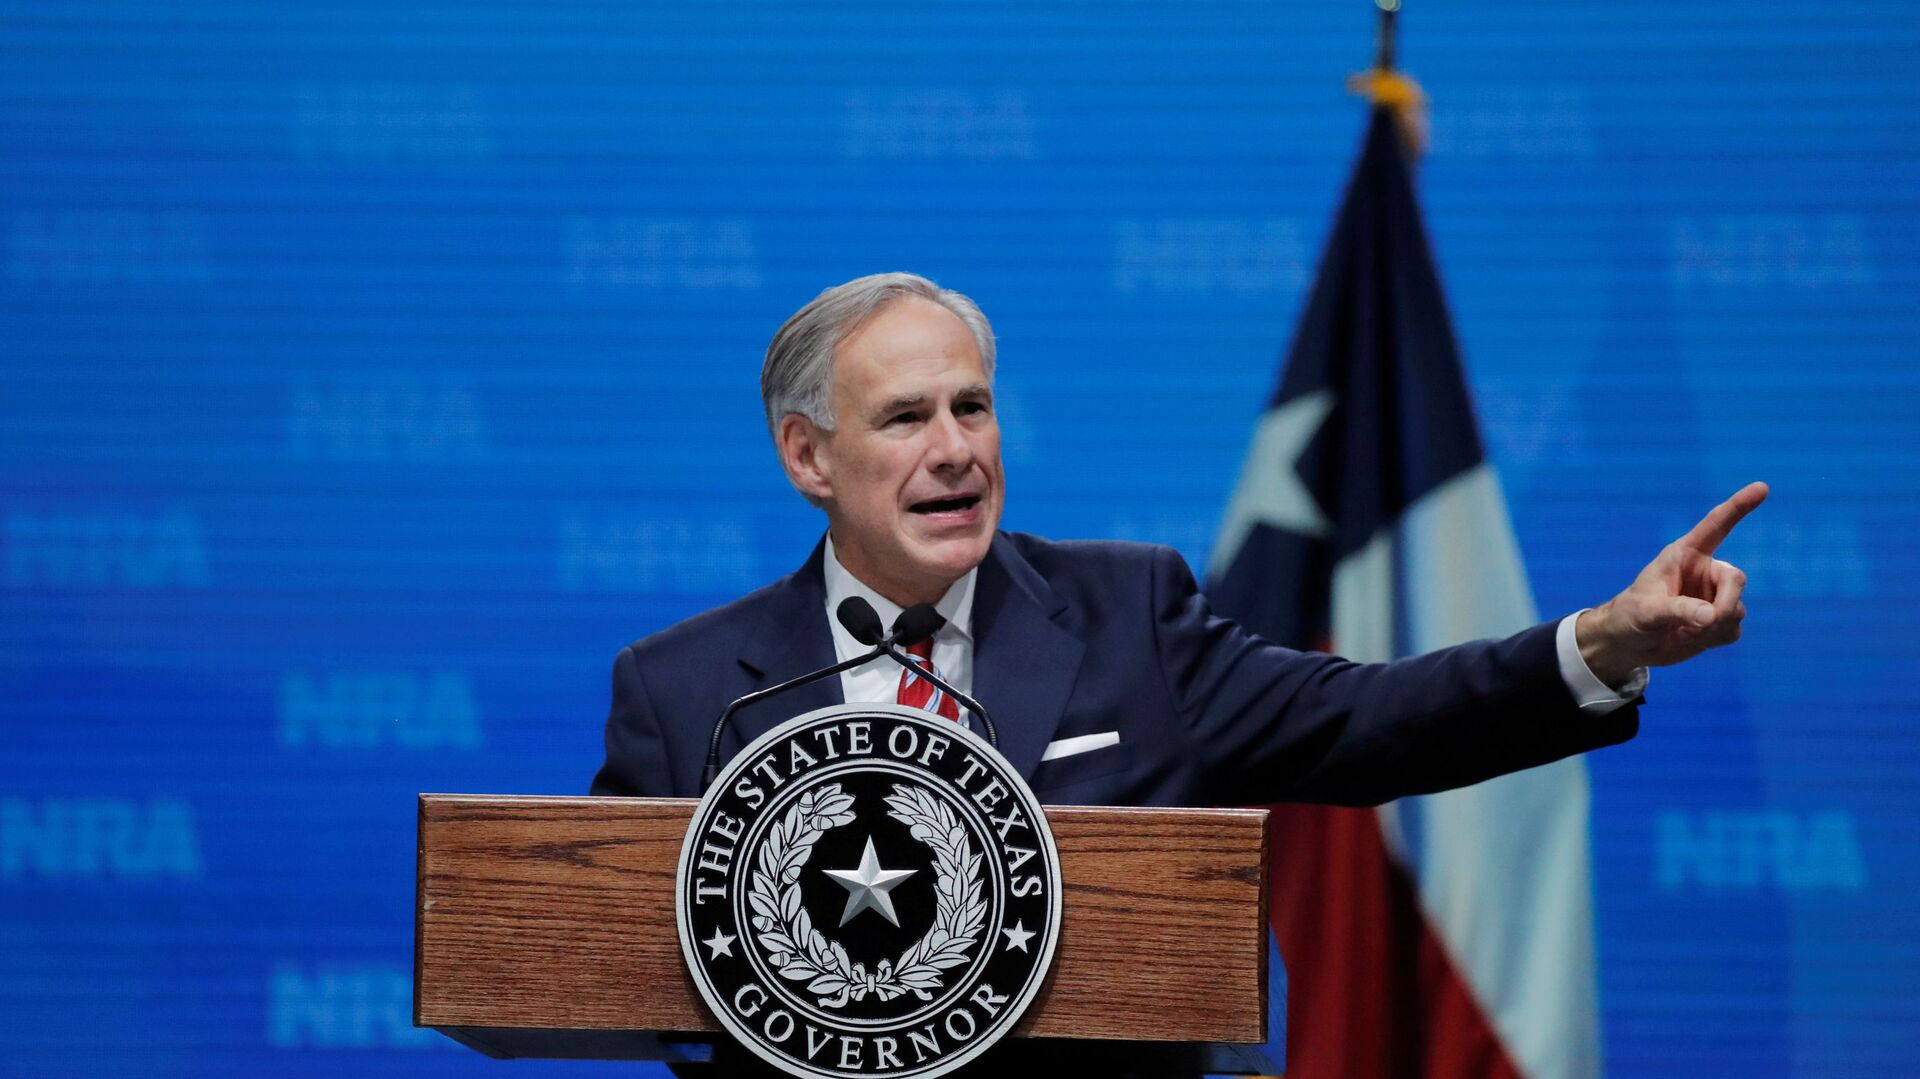 Texas Governor Greg Abbott speaks at the annual National Rifle Association (NRA) convention in Dallas, Texas, U.S., May 4, 2018 - Sputnik International, 1920, 03.09.2021